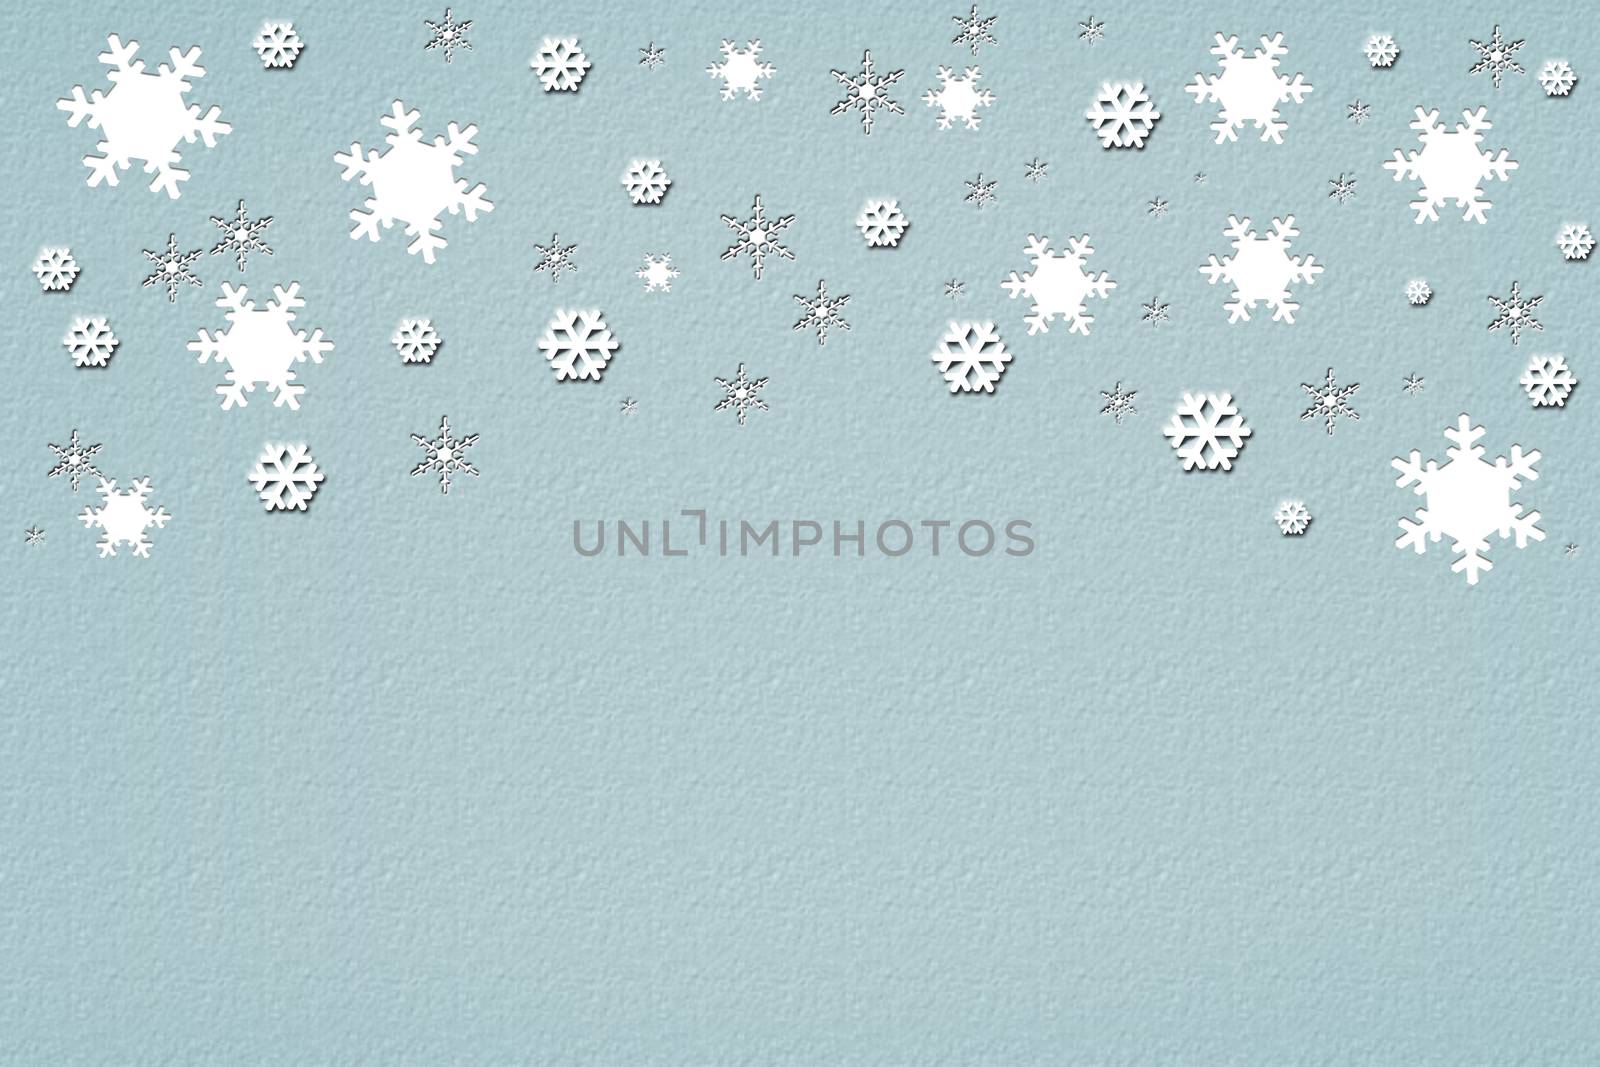 Snowflakes design for winter by NelliPolk